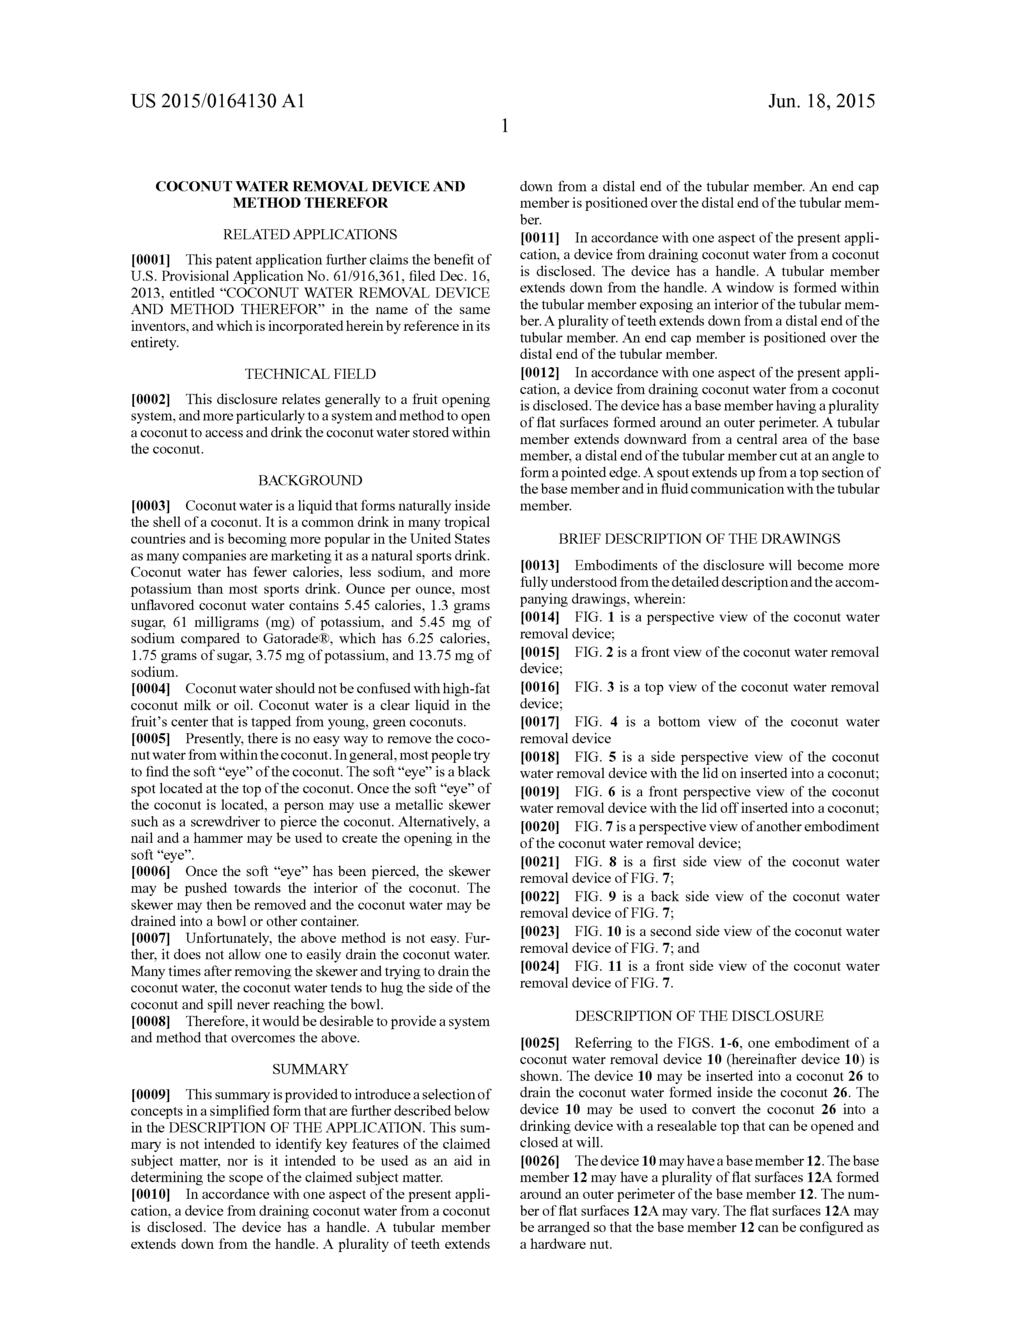 US 2015/O164130 A1 Jun. 18, 2015 COCONUT WATER REMOVAL DEVICE AND METHOD THEREFOR RELATED APPLICATIONS 0001. This patent application further claims the benefit of U.S. Provisional Application No.